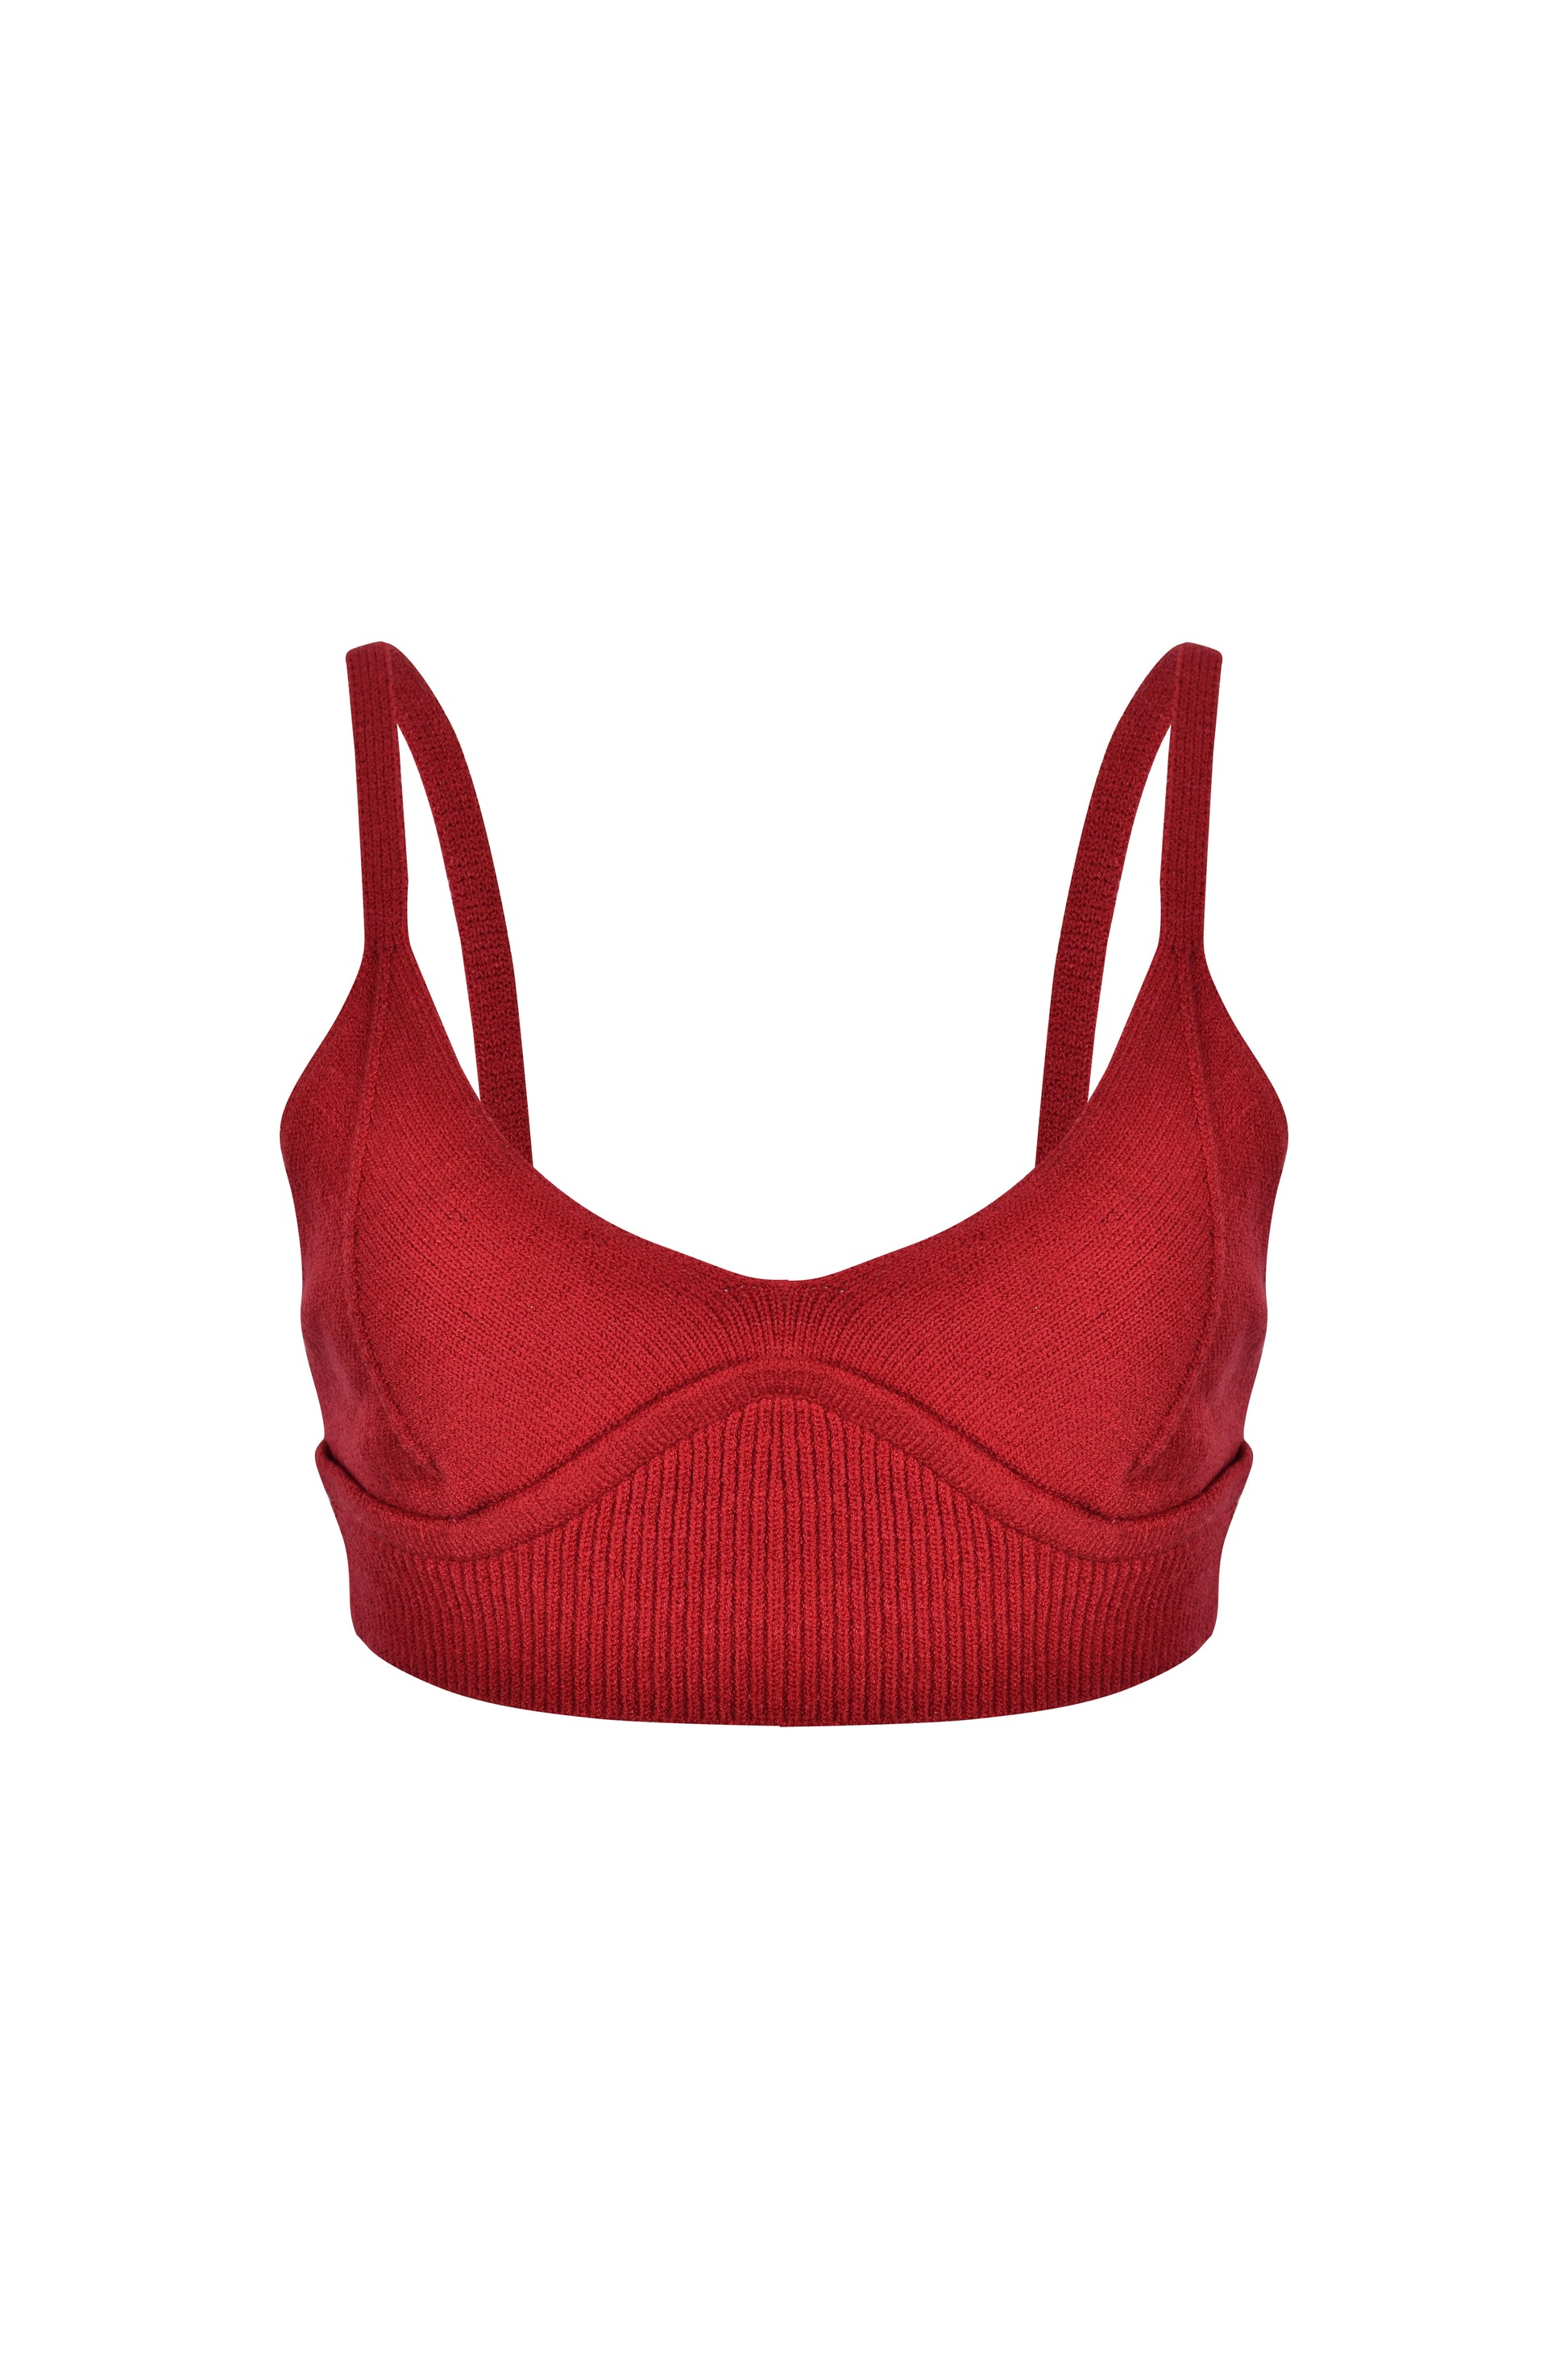 Pacific Top Red - essenTIALS Bali